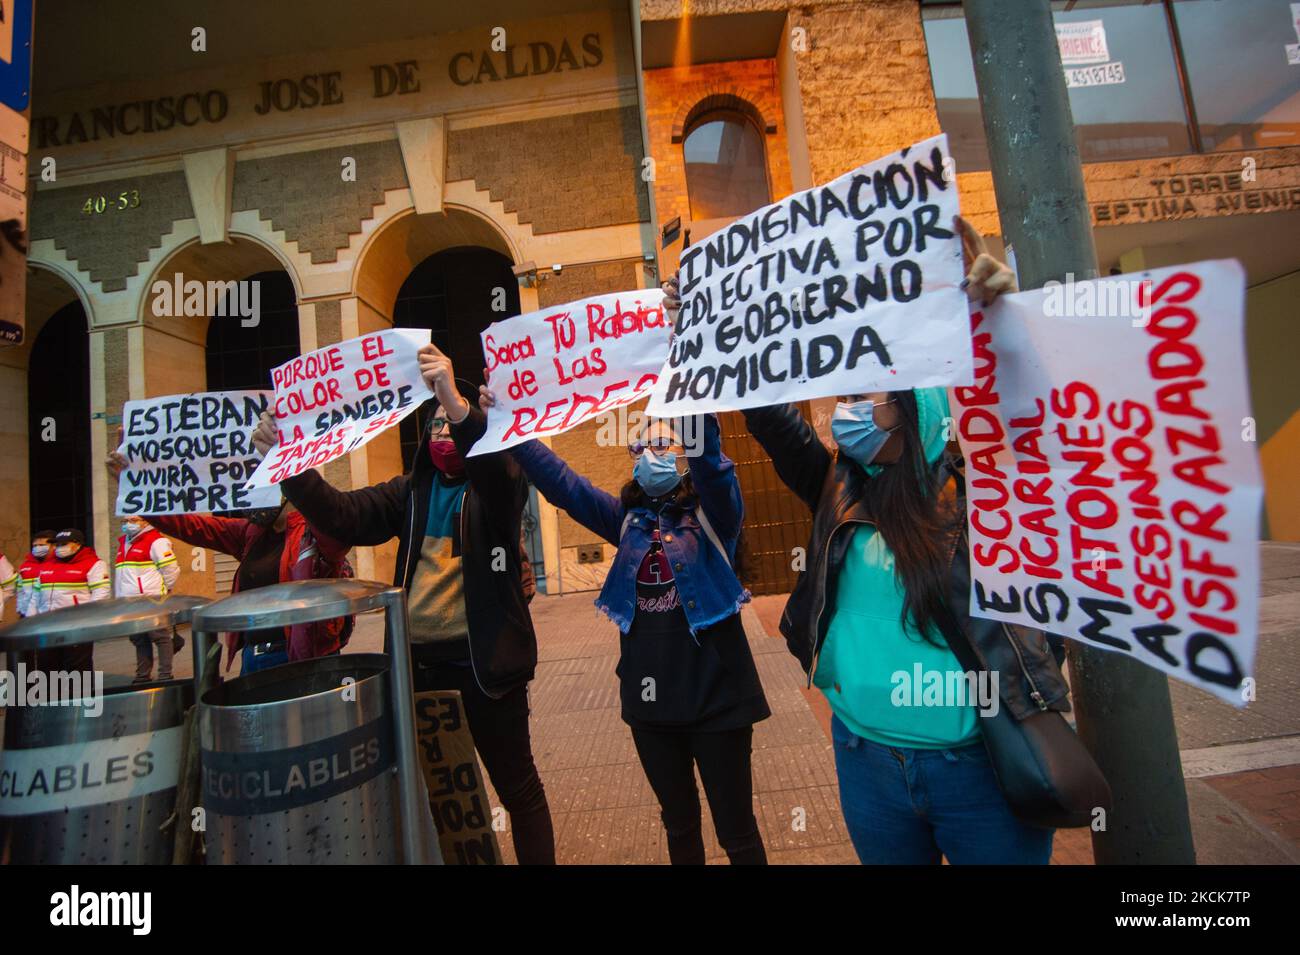 Demonstrators hold signs against police brutality during a student rally of the Universidad Distrital, after Esteban Mosquera, a social leader and community member was killed two years after loosing his eye on a police brutality case, in Bogota, Colombia on August 26, 2021. (Photo by Sebastian Barros/NurPhoto) Stock Photo